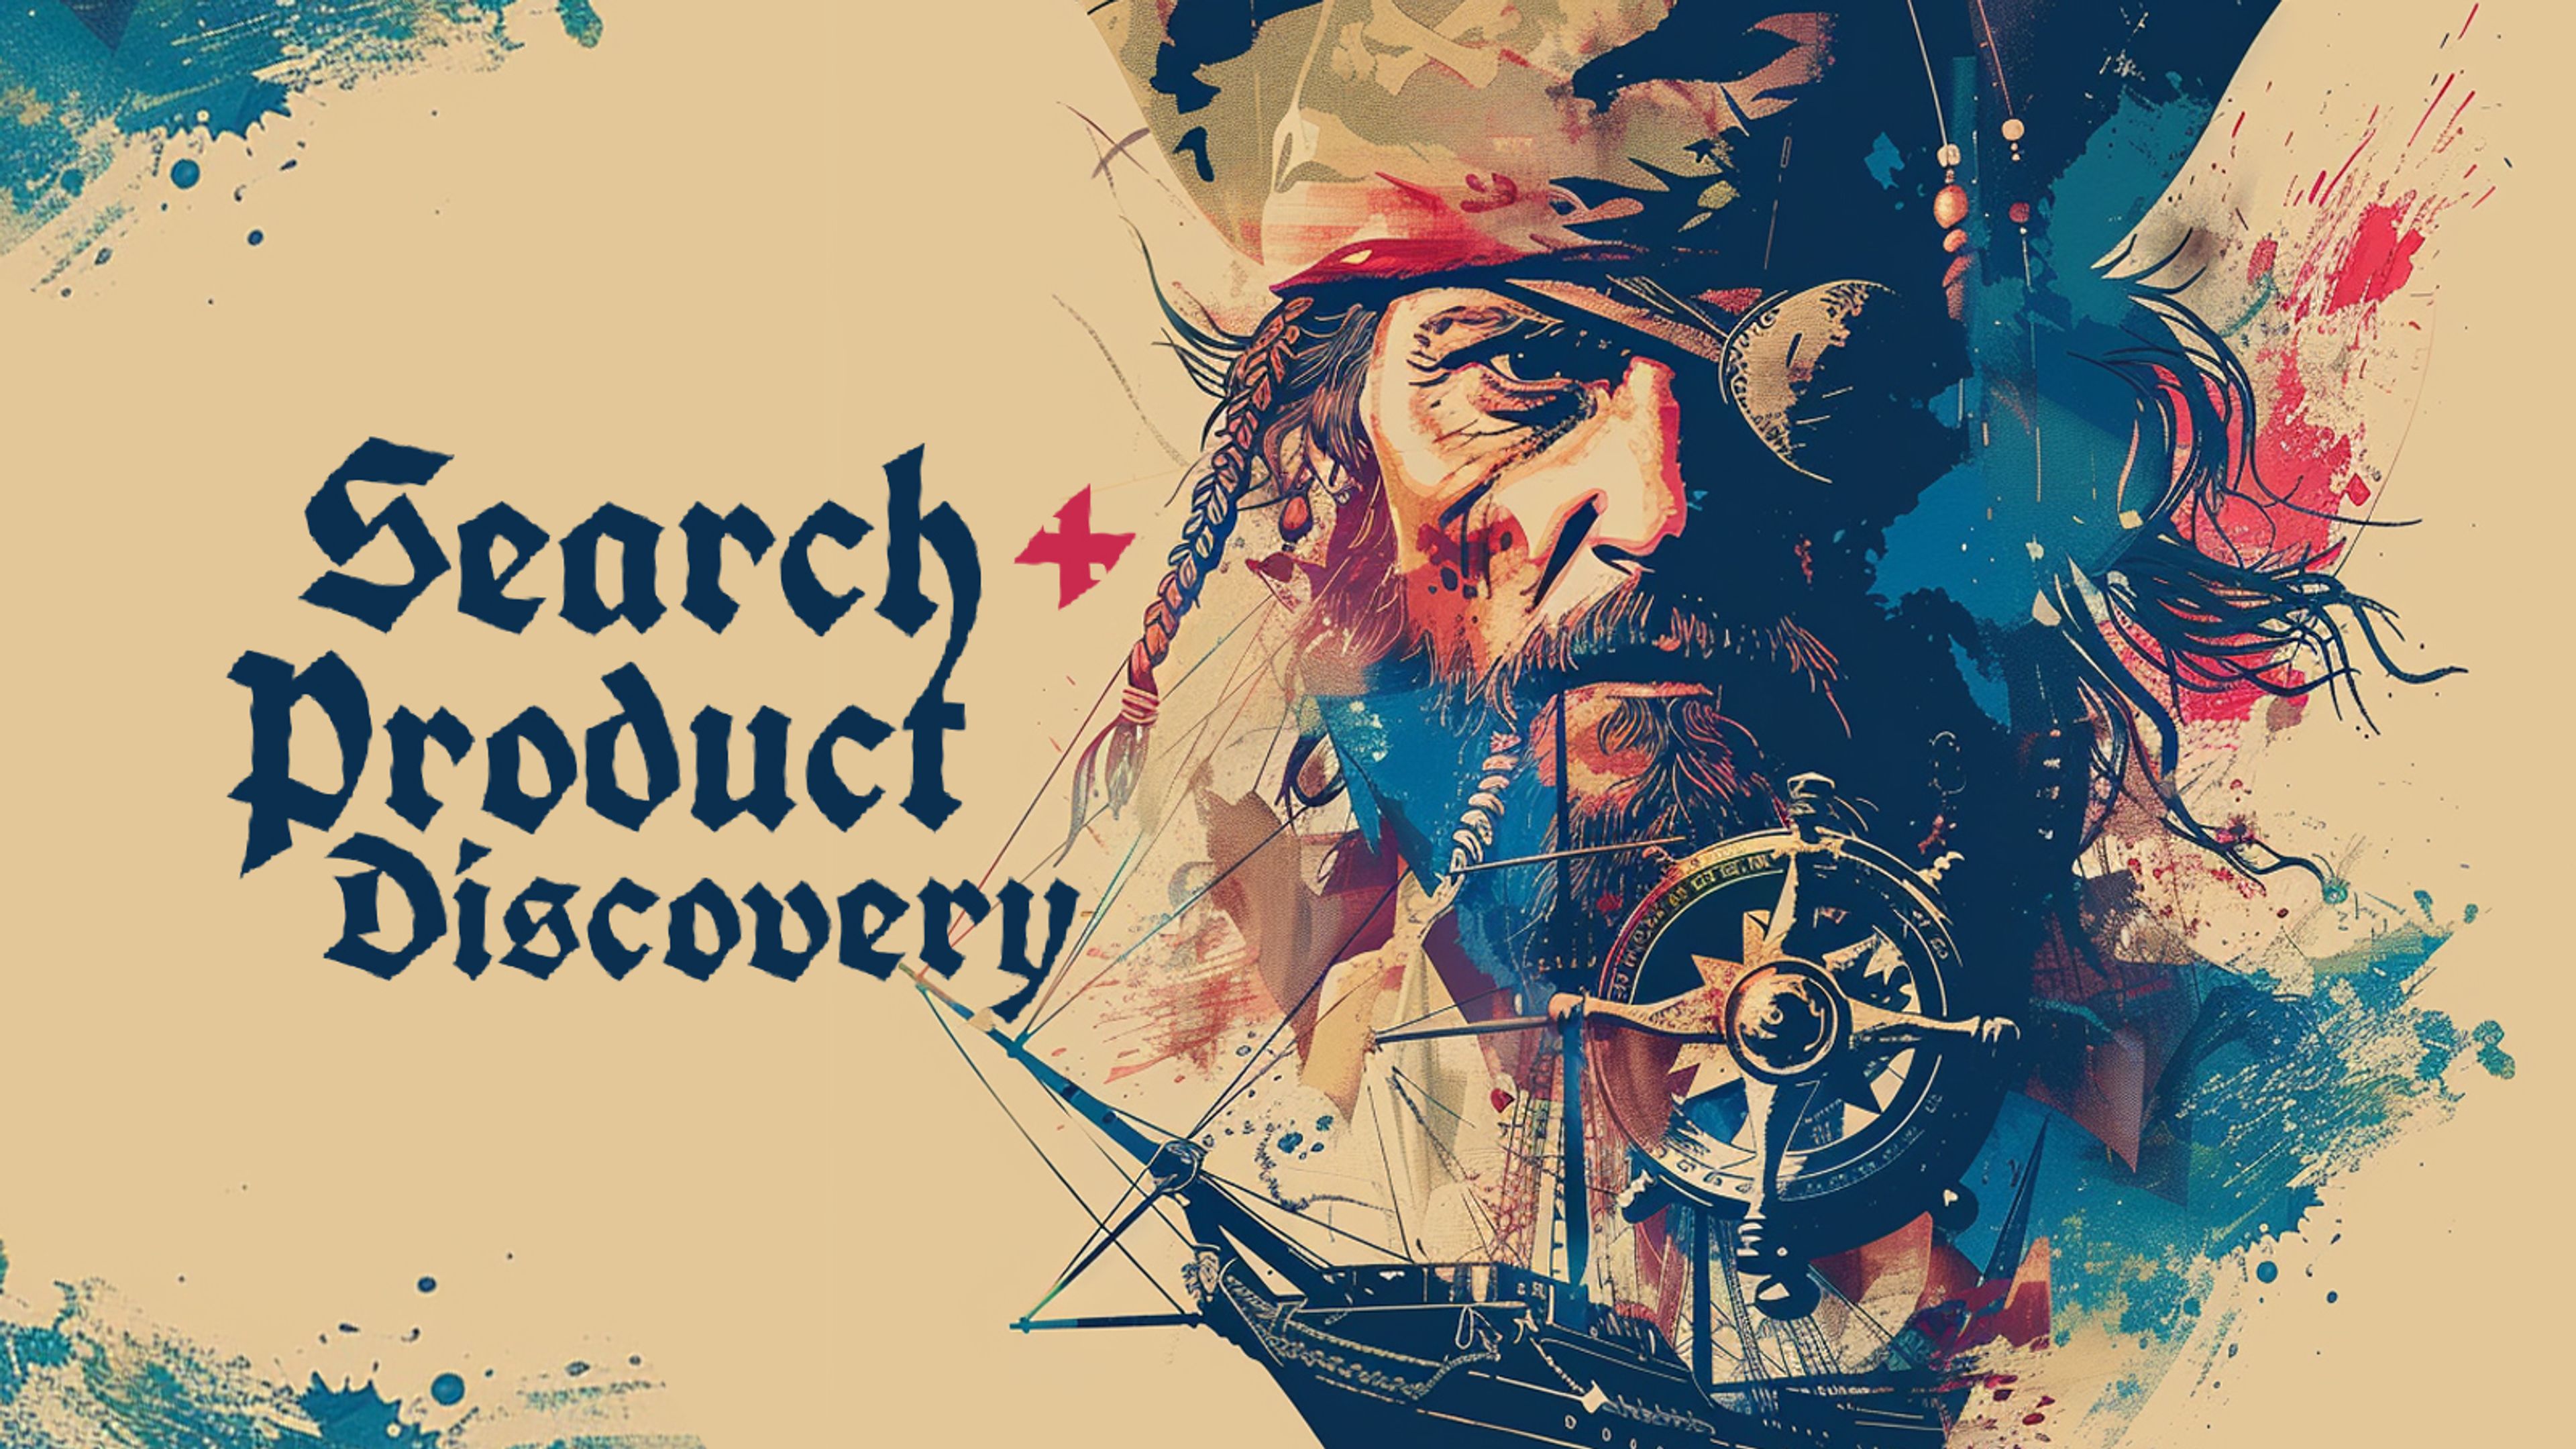 Illustration of a pirate and a compass with calligraphy reading "Search and Product Discovery"